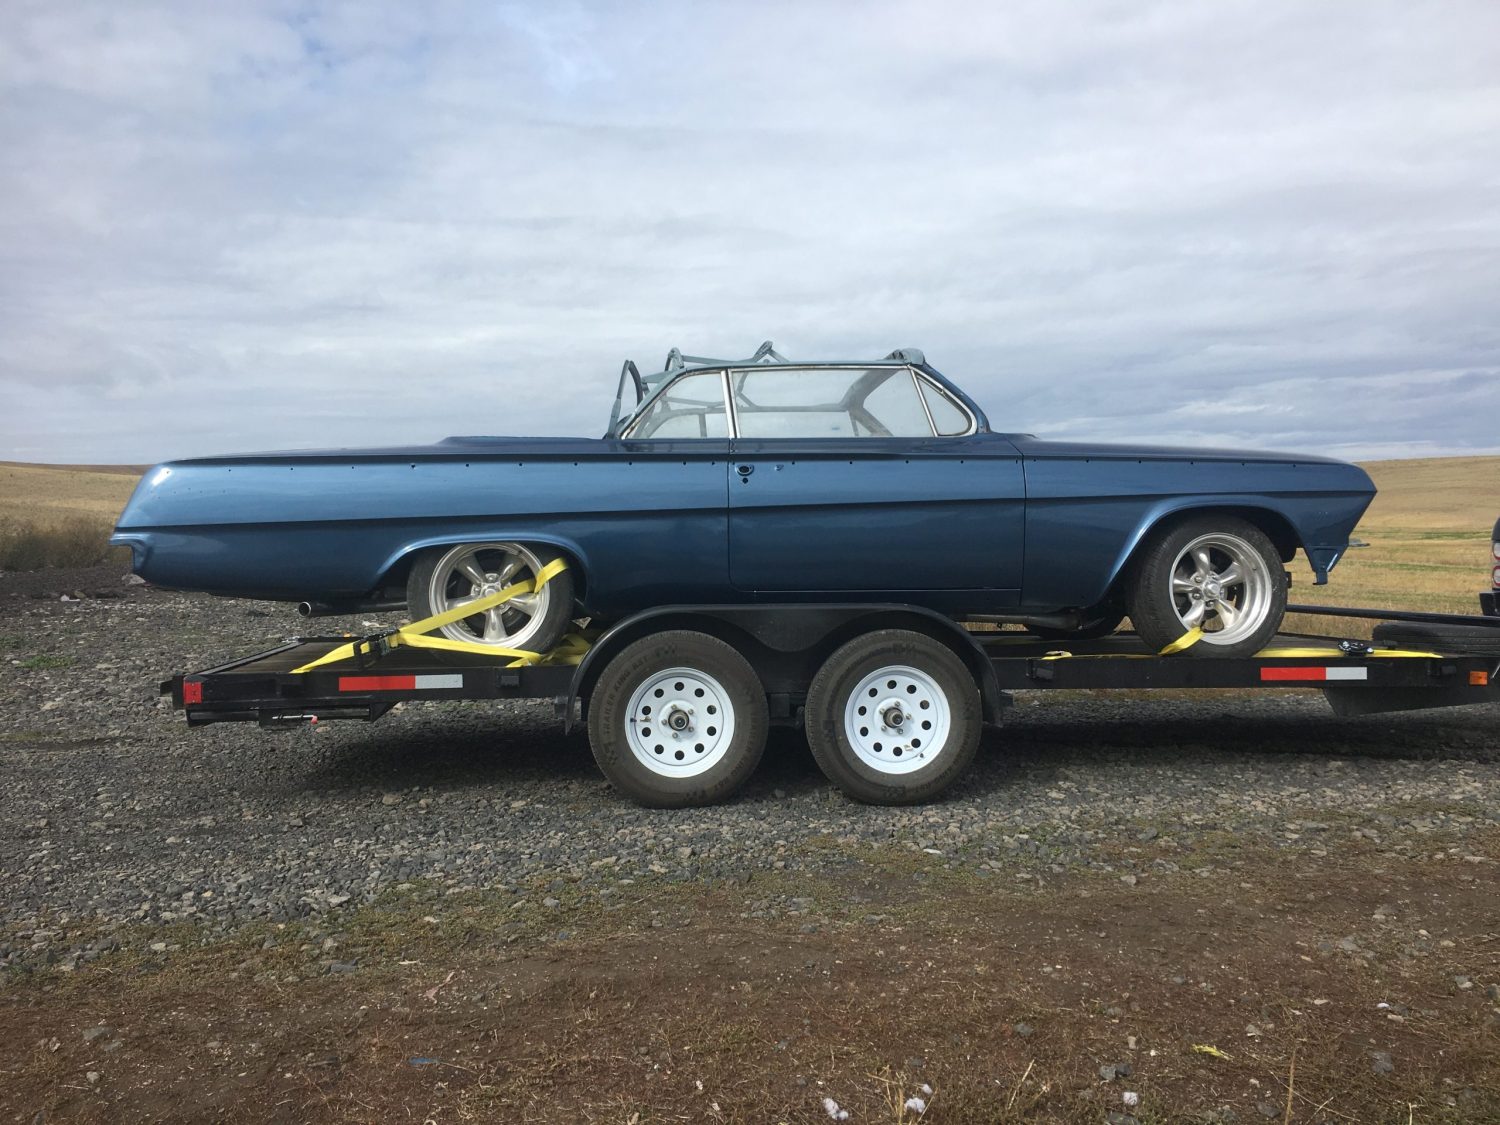 The ’62 Impala SS Convertible has finally been painted!